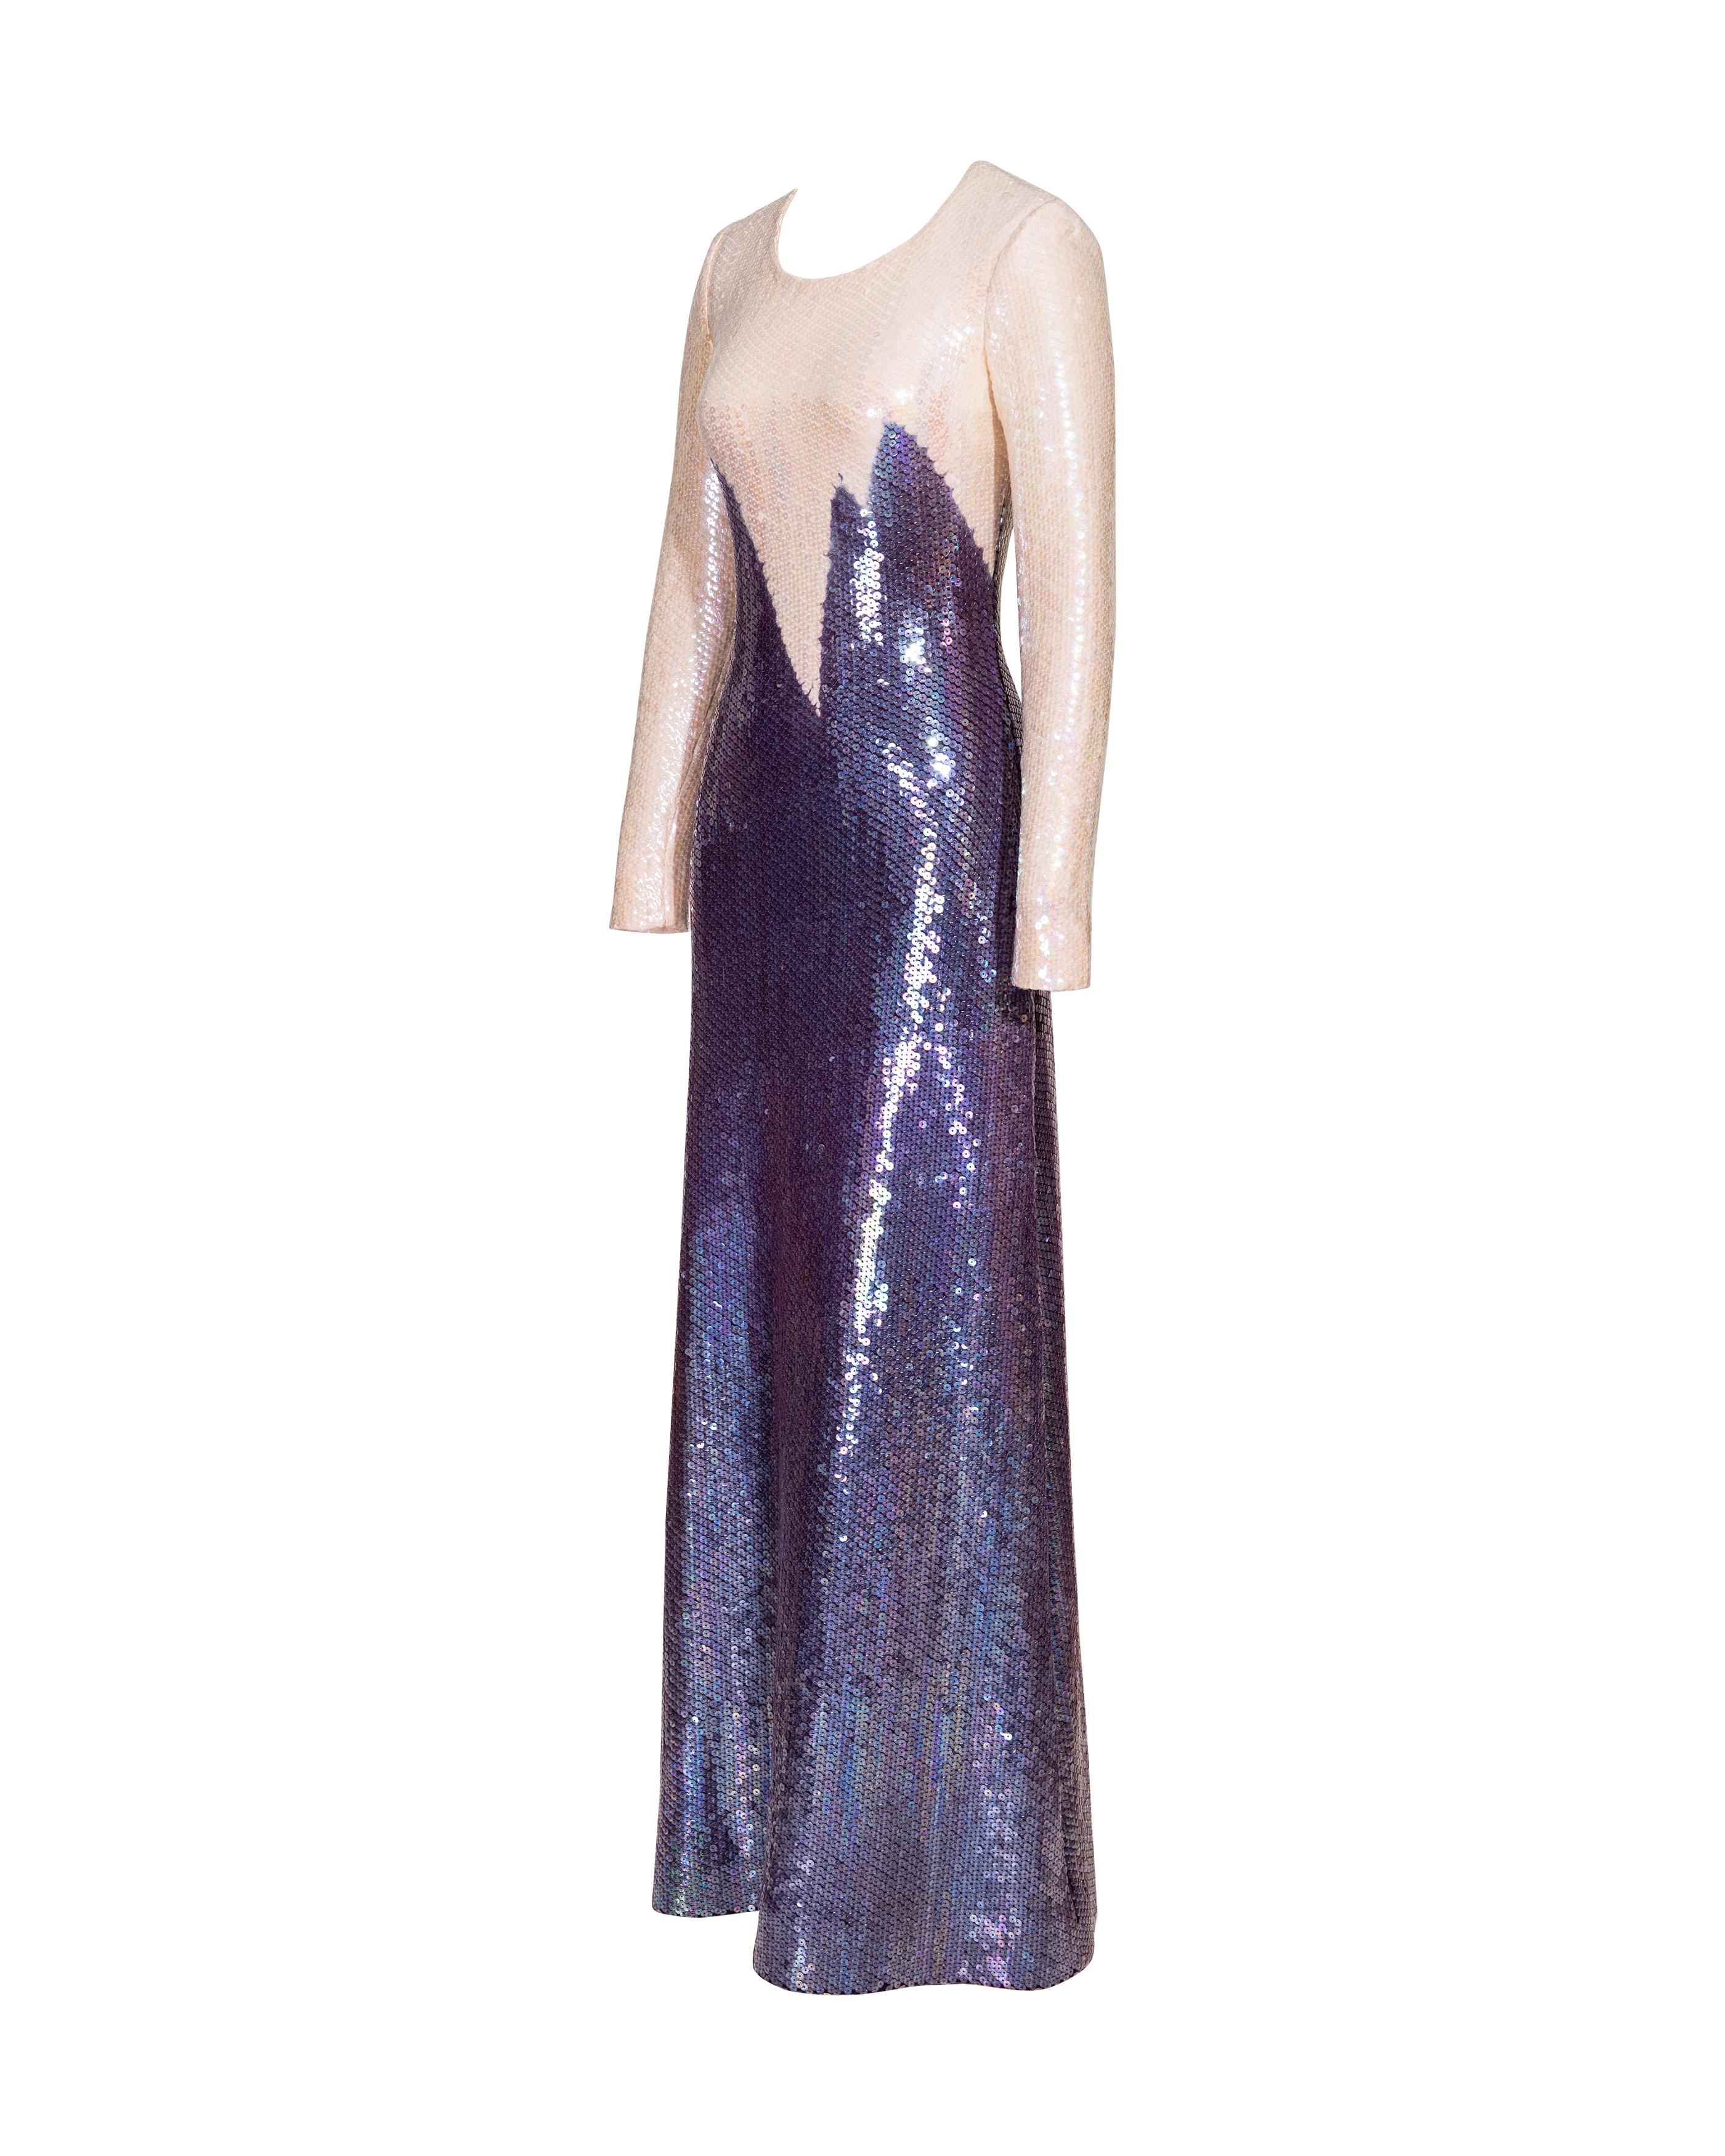 A/W 1973 Halston Oil Slick Geometric Point Long Sleeve Sequin Gradient Gown In Excellent Condition For Sale In North Hollywood, CA